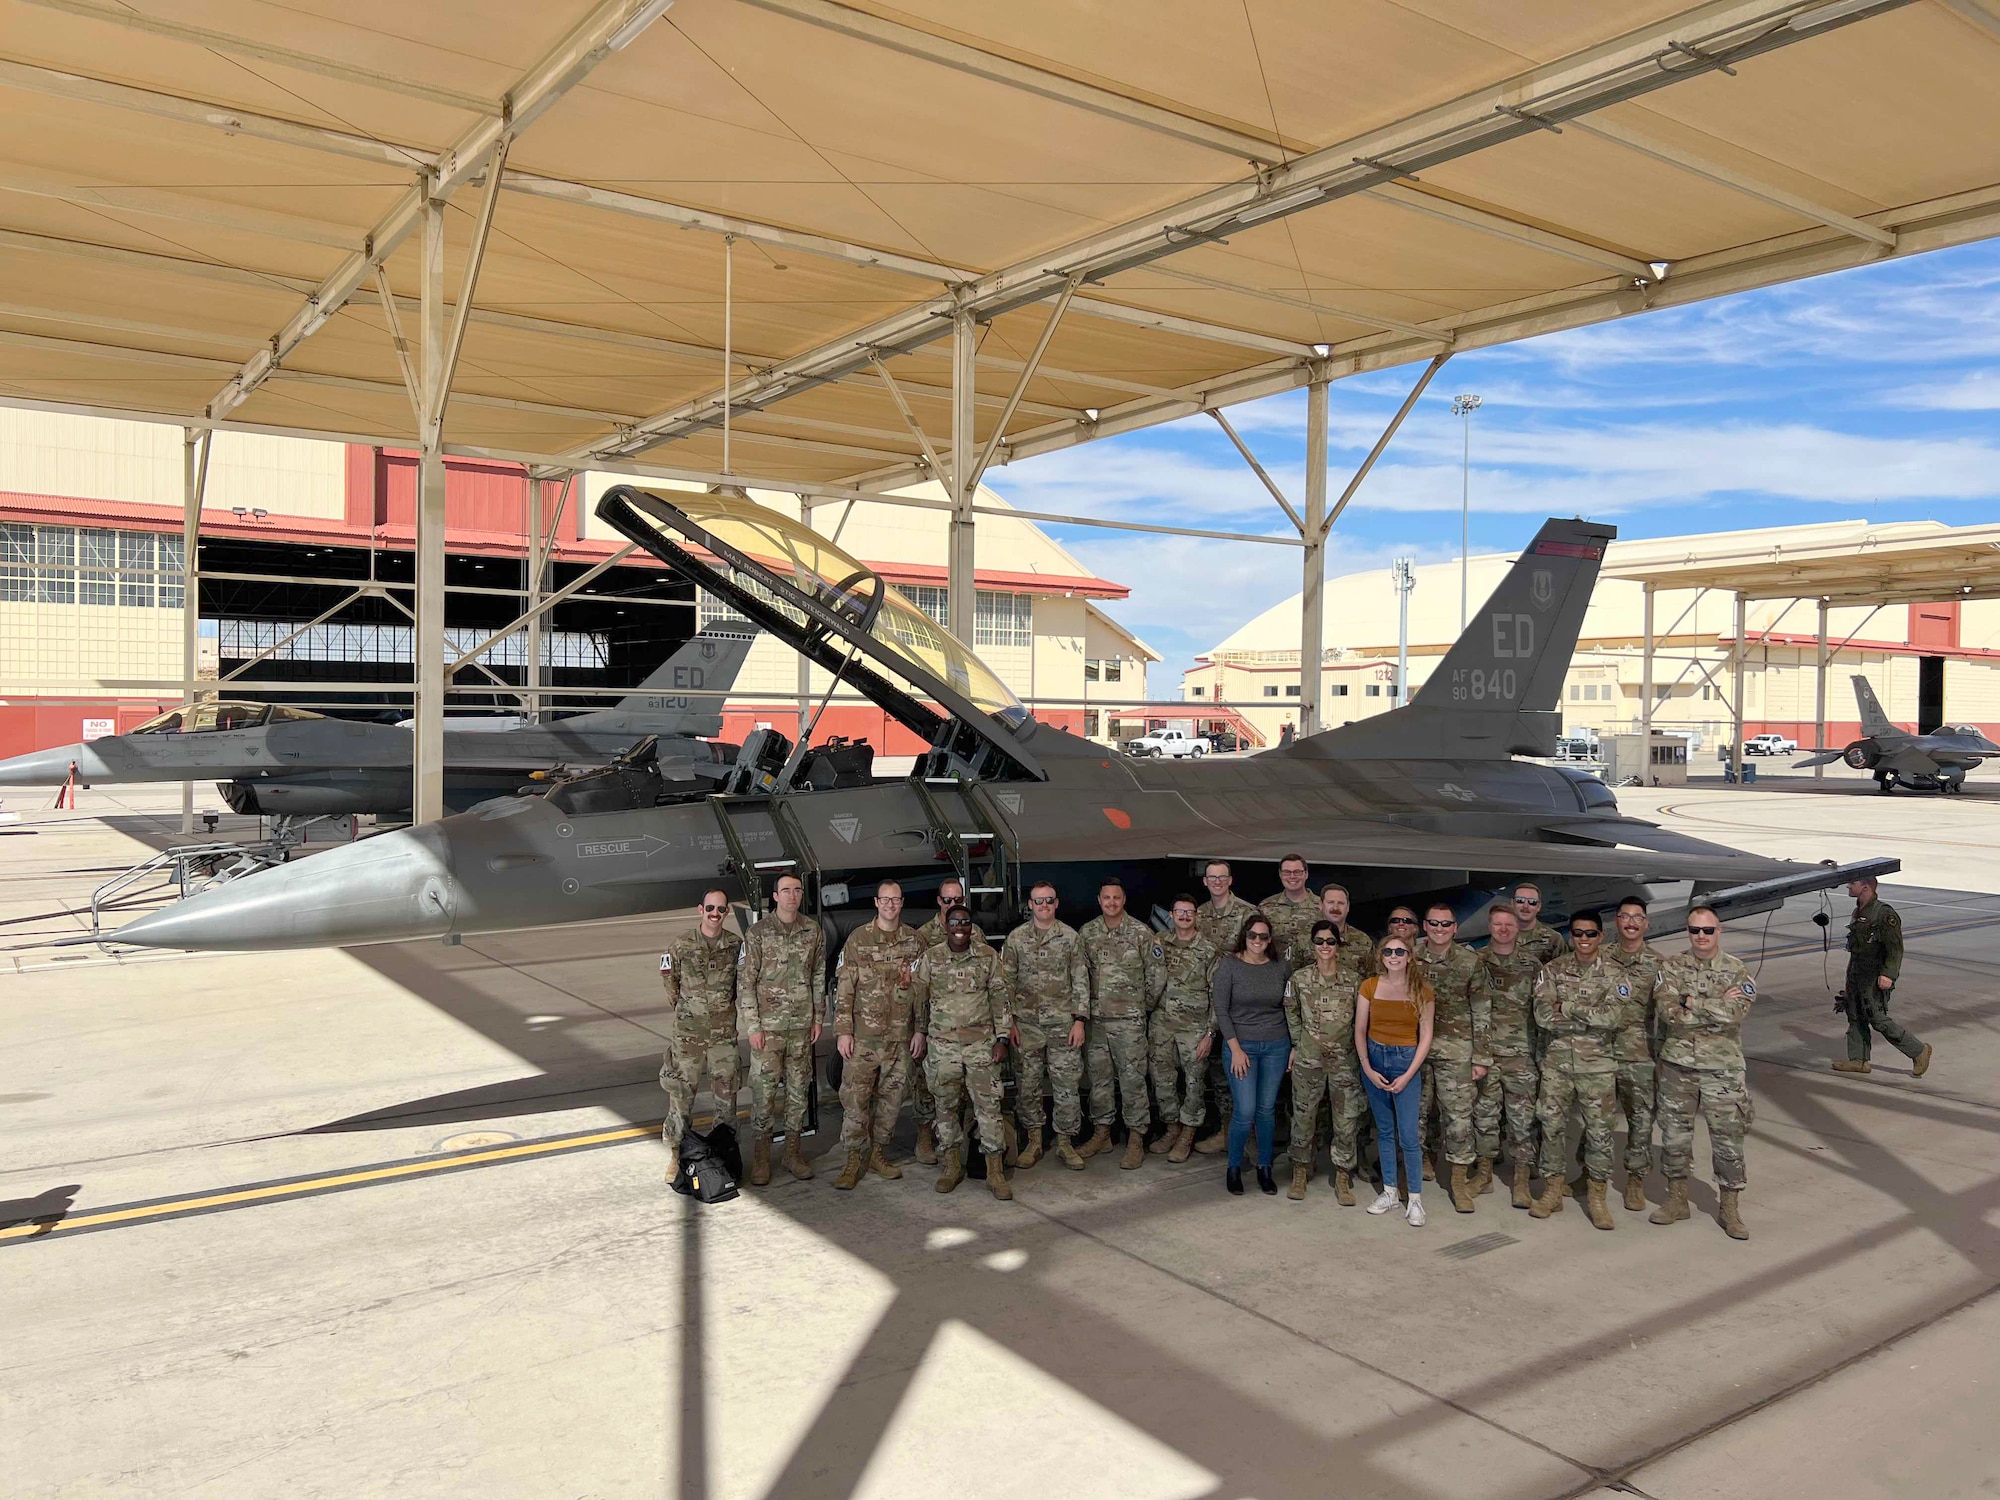 Savannah Langer, pictured front right, Arnold Engineering Development Complex aerospace engineer, stands with a large group of people by an F-16 Fighting Falcon.